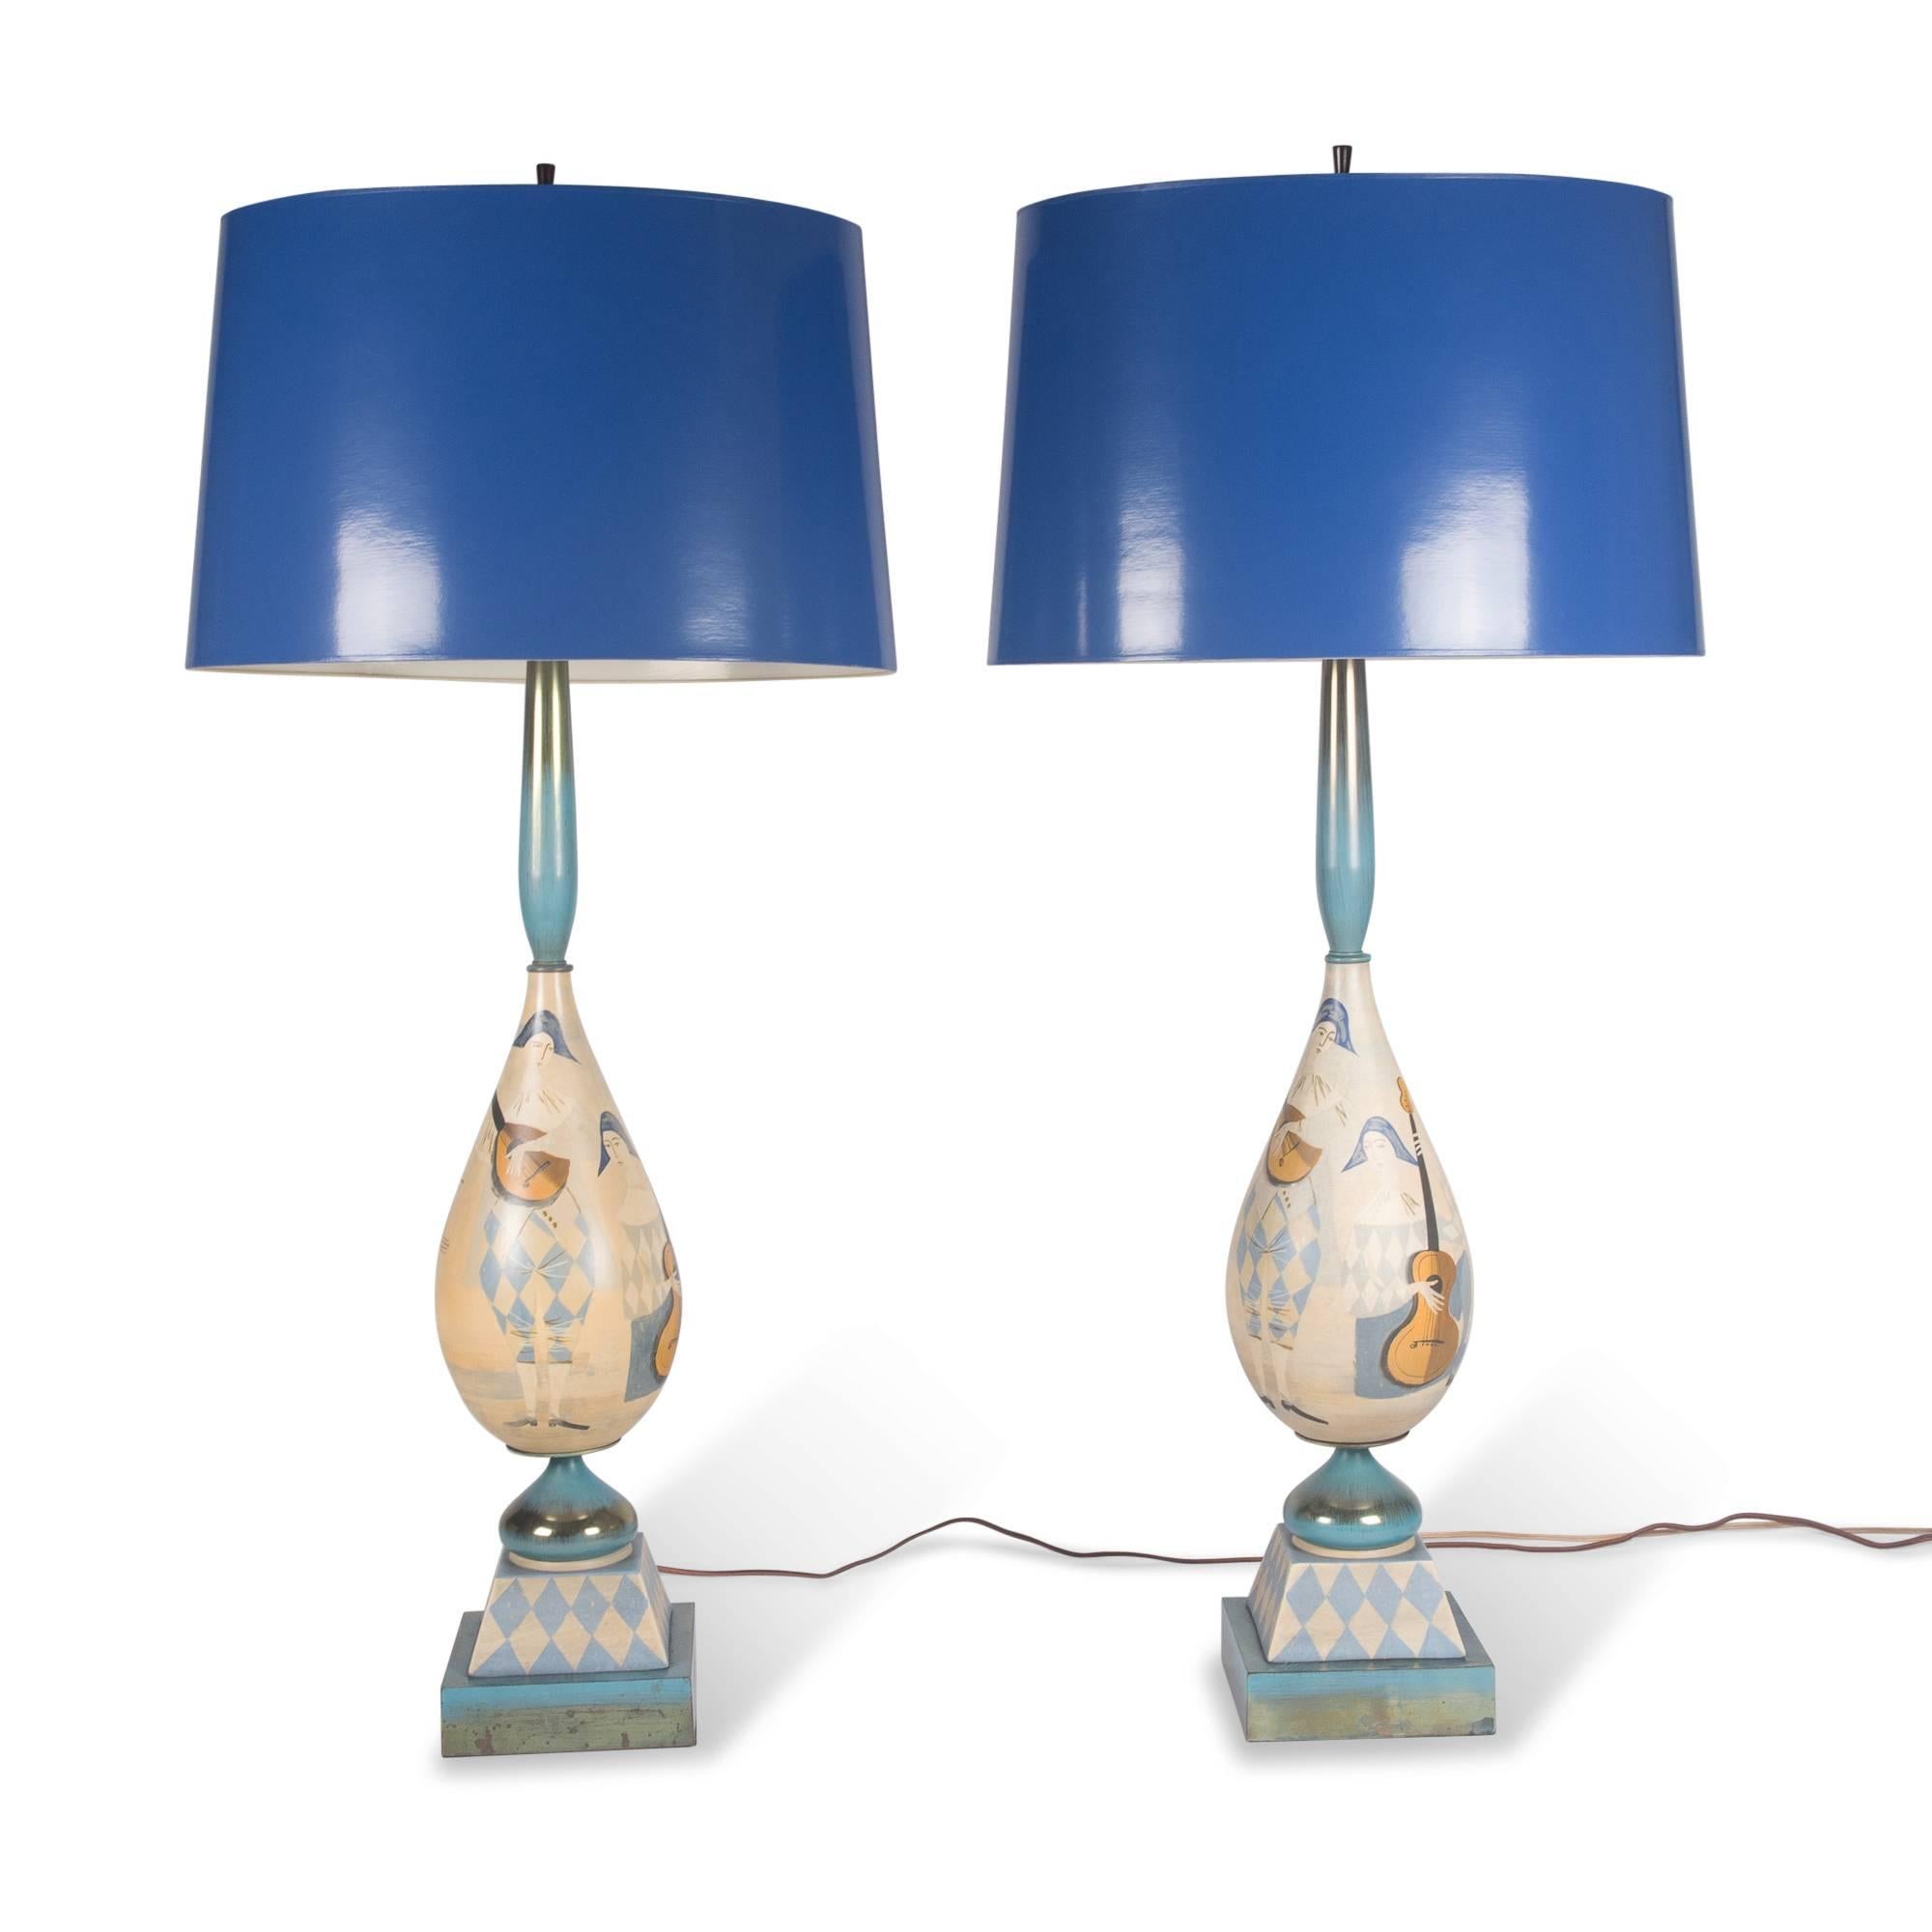 Pair of tall painted wood table lamps, ovoid central element mounted on a square base, with tall narrow neck, Italy, 1930s. Painted with scenes of musicians. In custom blue paper shades. Measures: Overall height to top of shade 43 in. Base measures